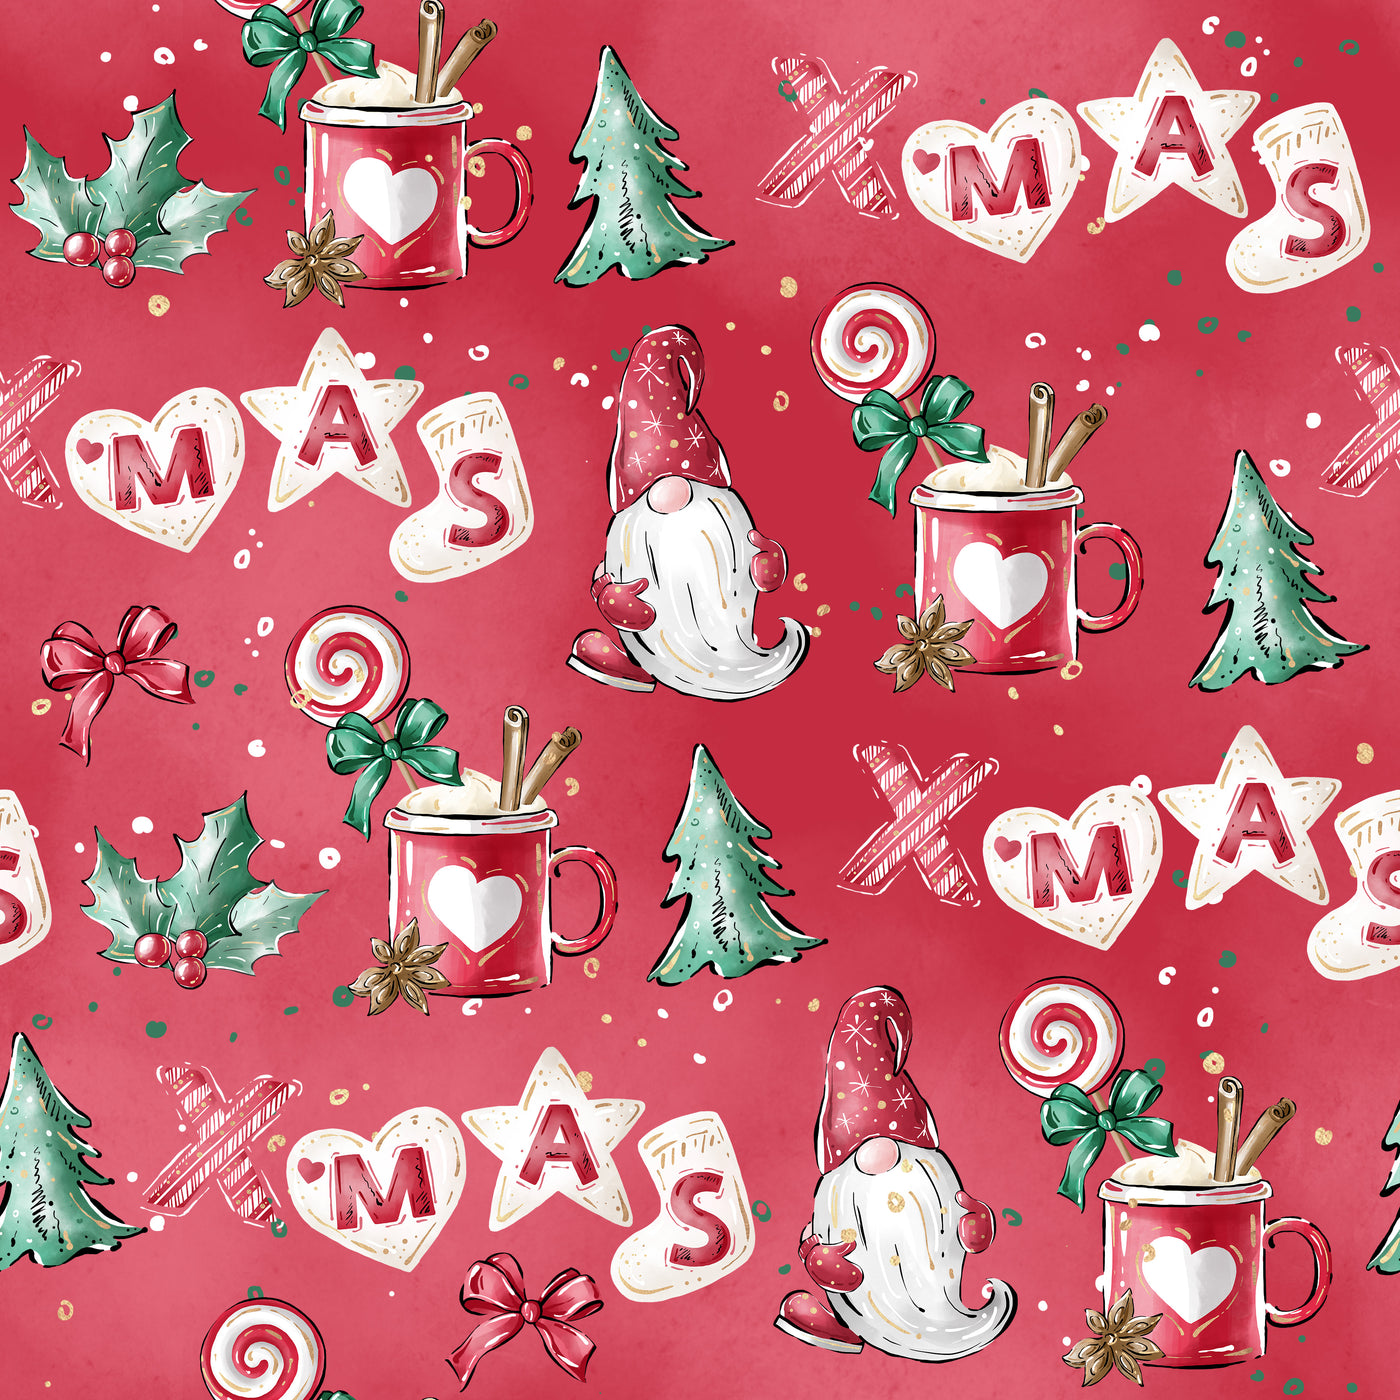 Adhesive Patterned Vinyl - Christmas Gnome 6